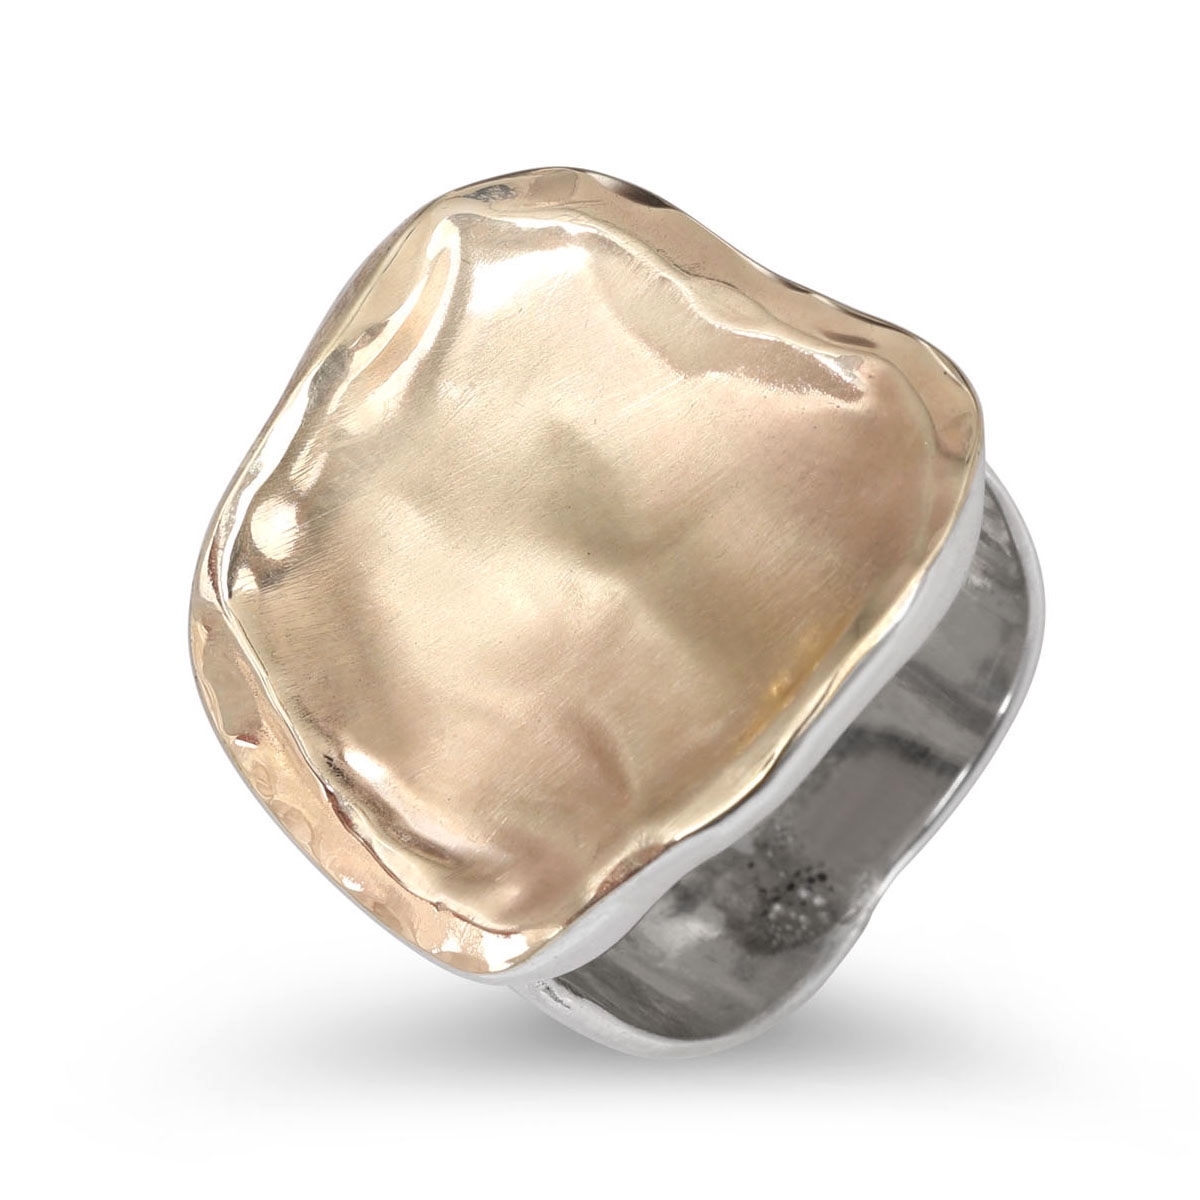 Moriah Jewelry Abstract Gold and Sterling Silver Brushed Ring  - 1